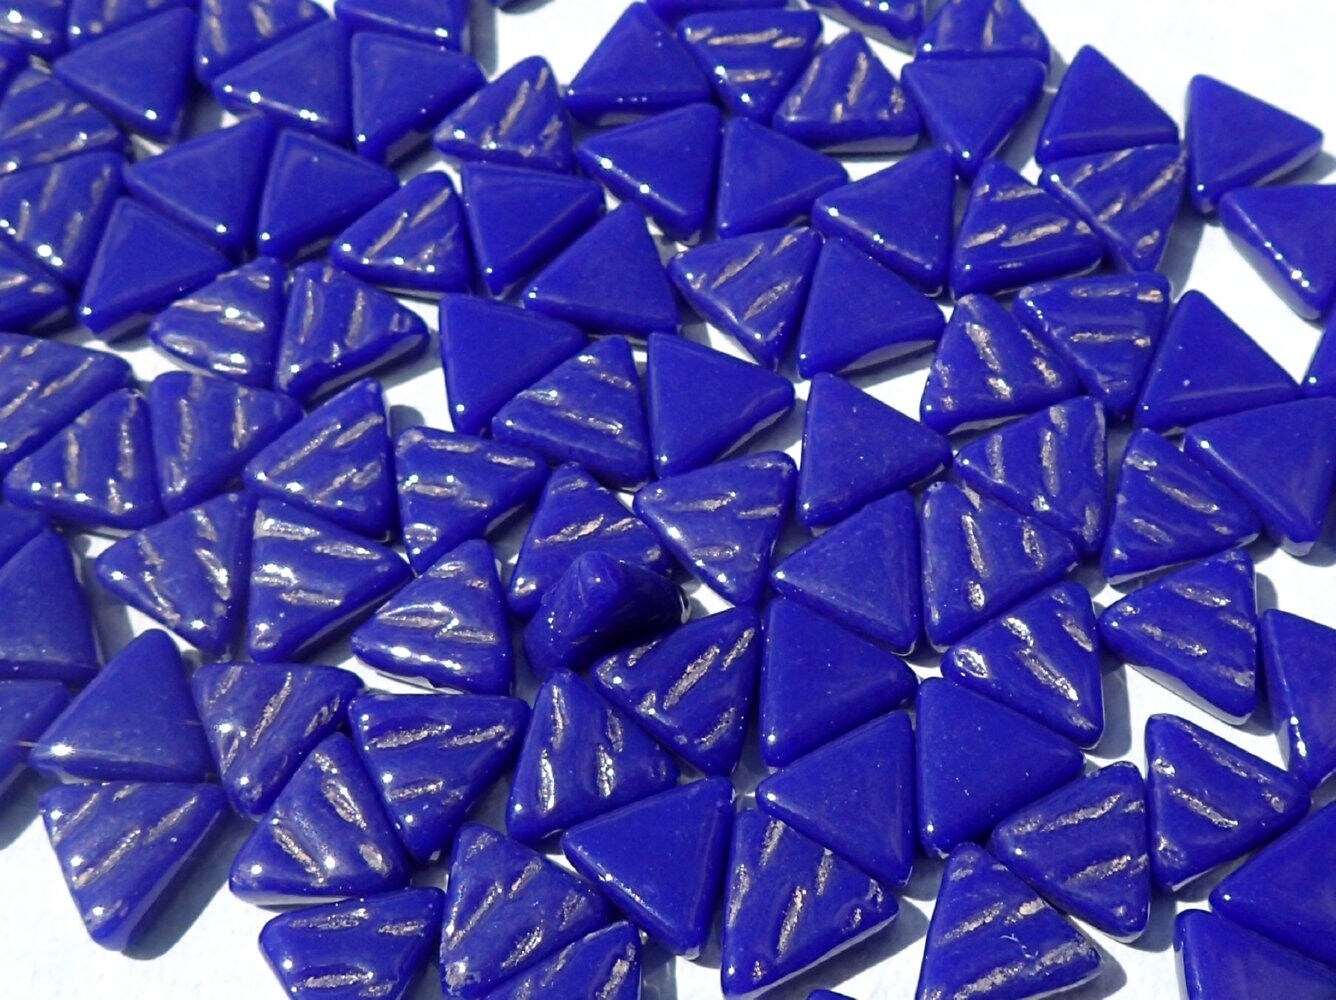 Small Blue Triangle Glass Mosaic Tiles - 10mm - Opaque Glass Solid Color - 50g of Triangles in Royal Blue